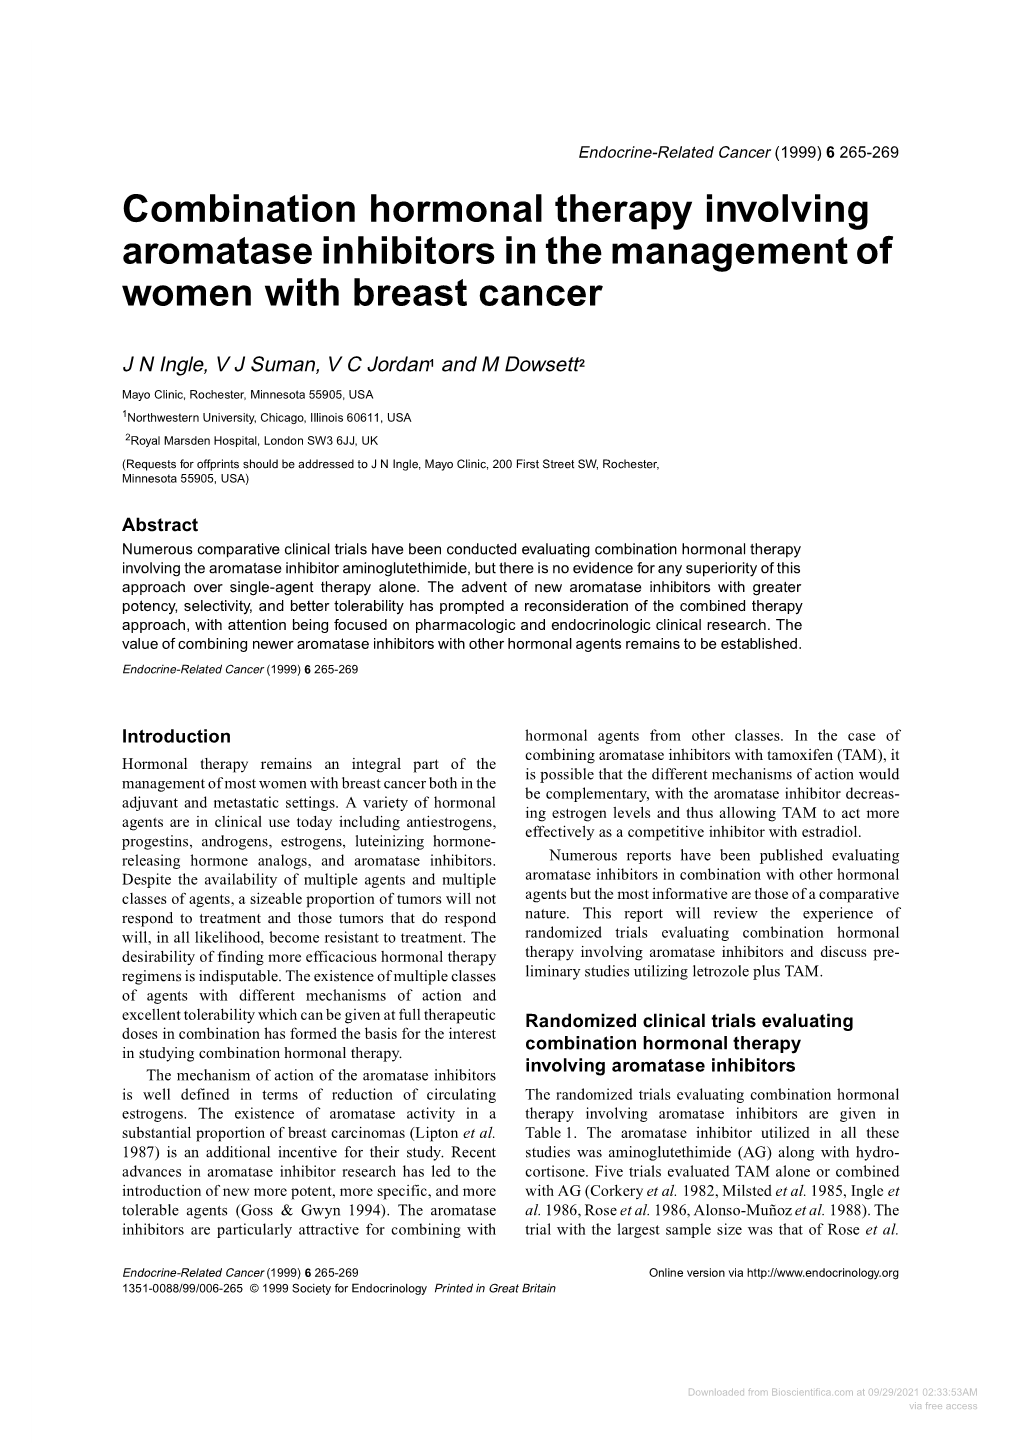 Combination Hormonal Therapy Involving Aromatase Inhibitors in the Management of Women with Breast Cancer